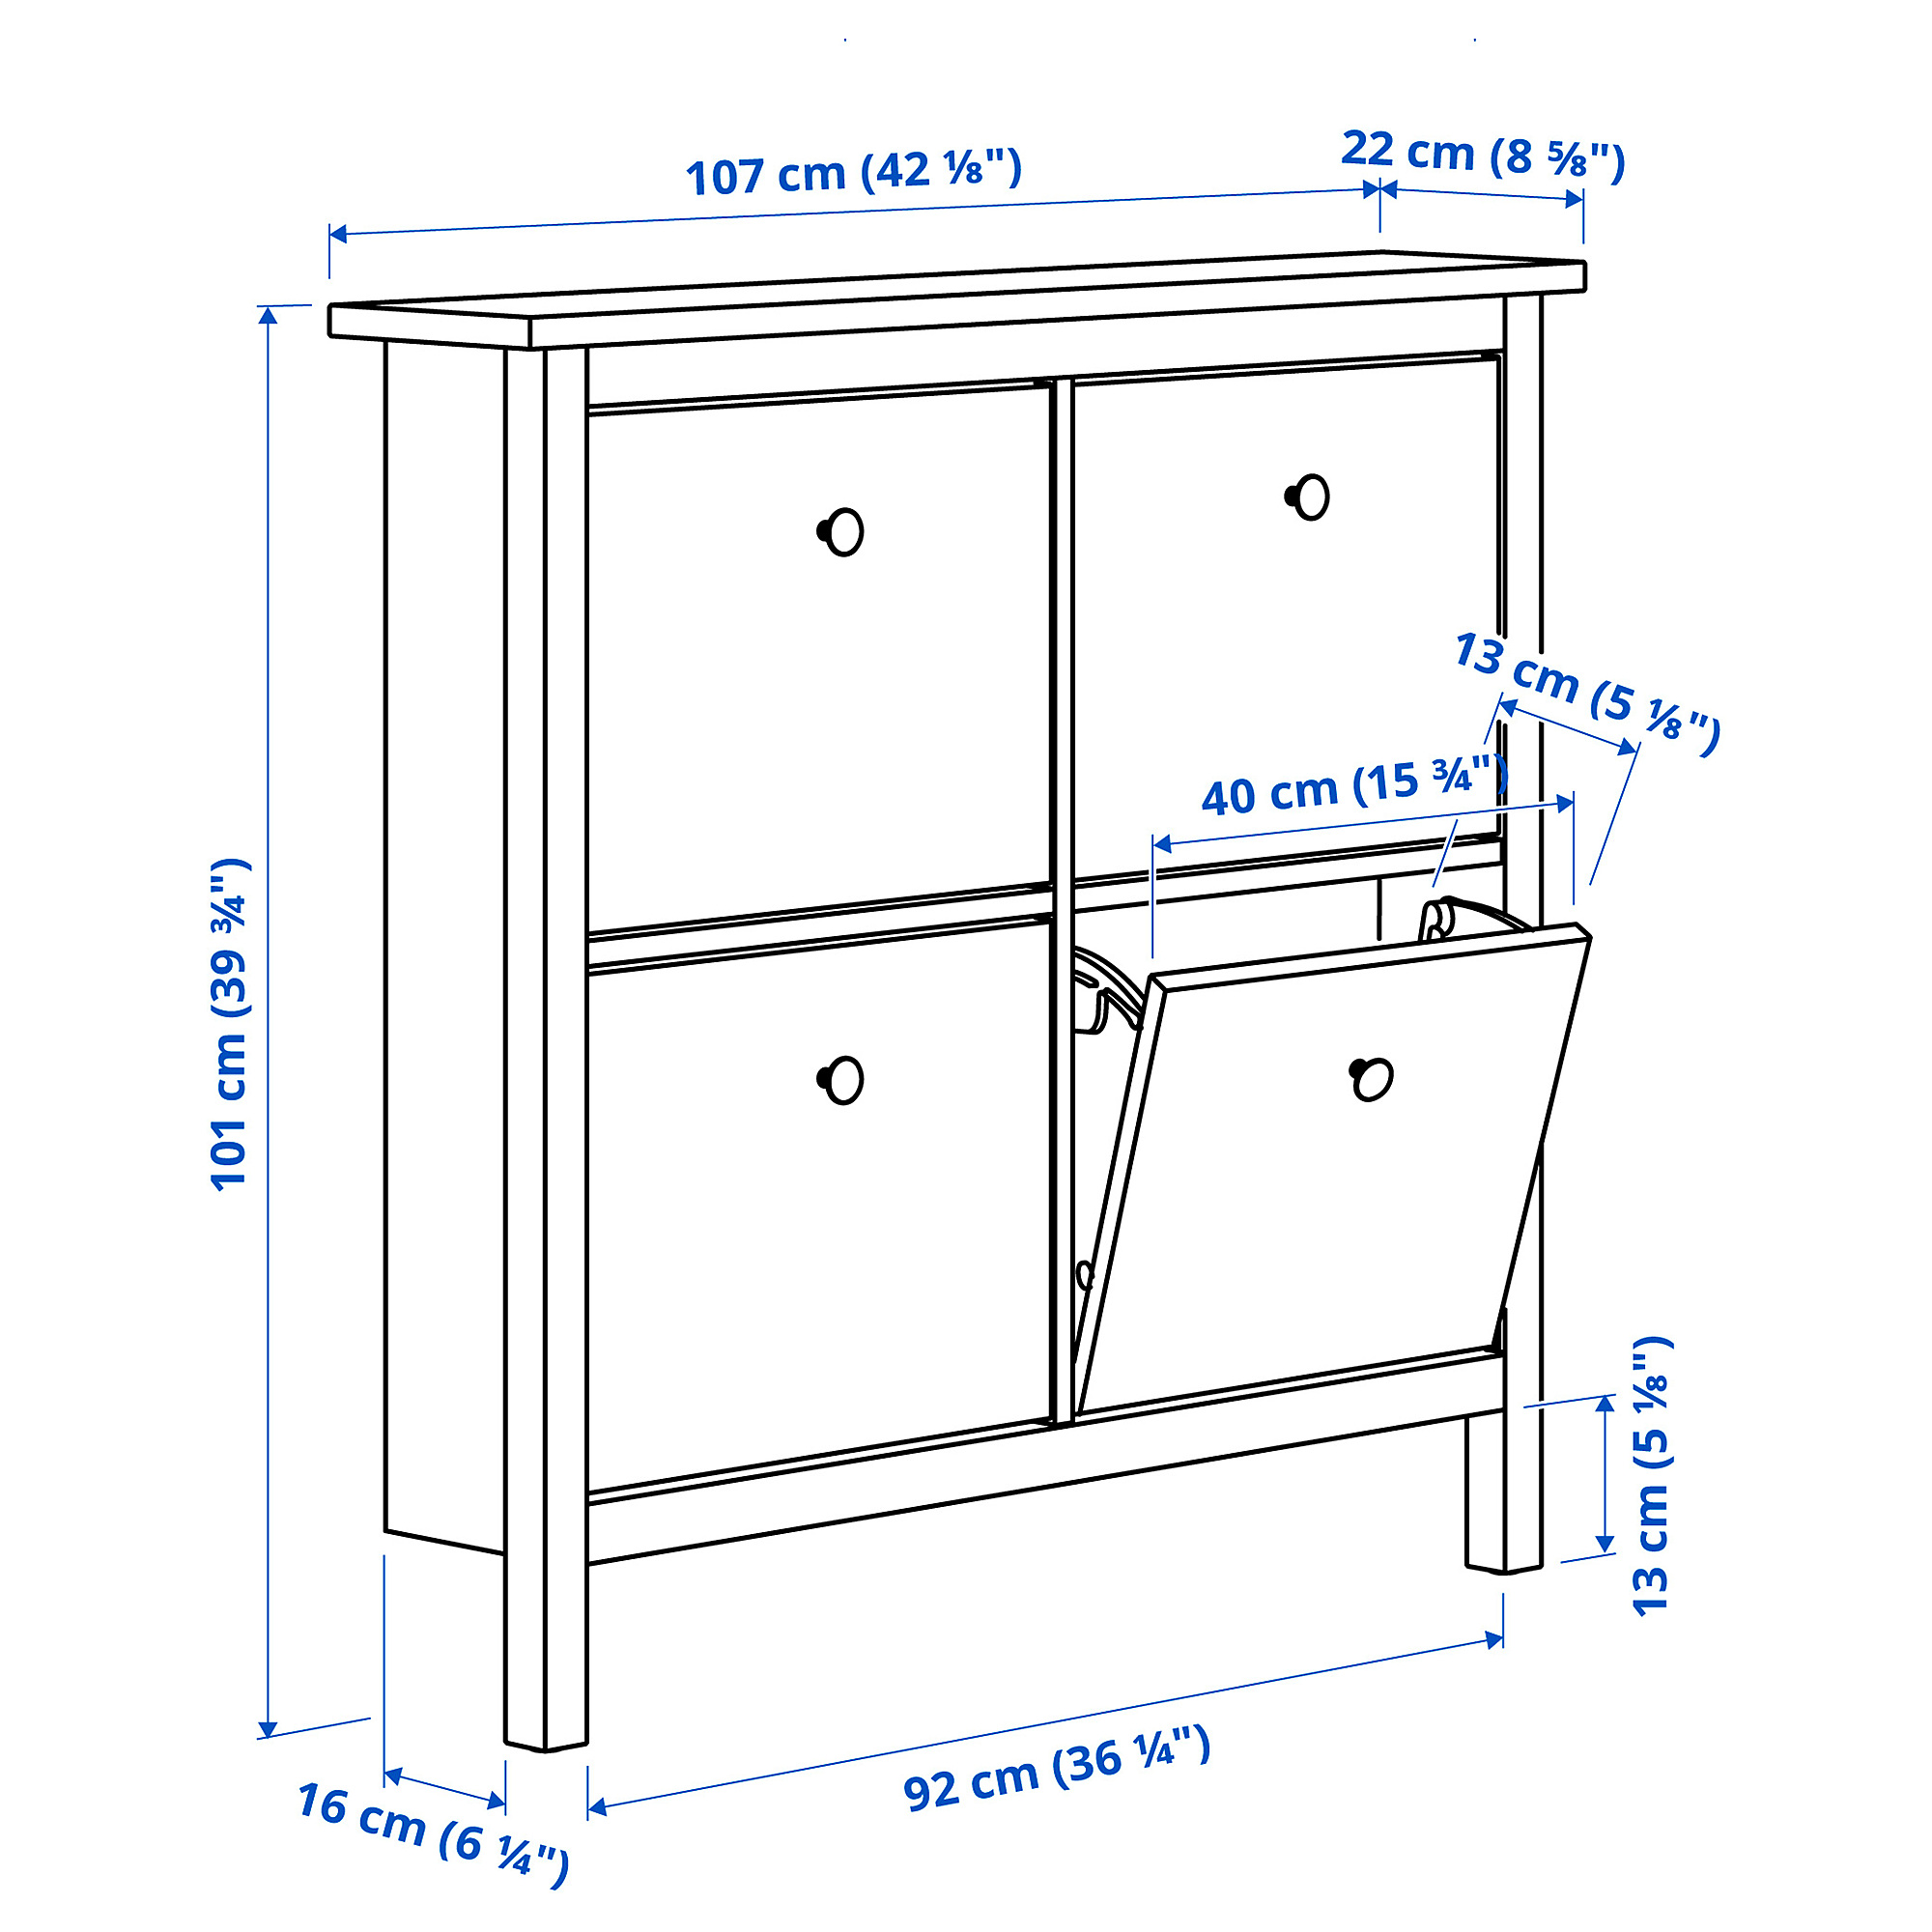 HEMNES shoe cabinet with 4 compartments